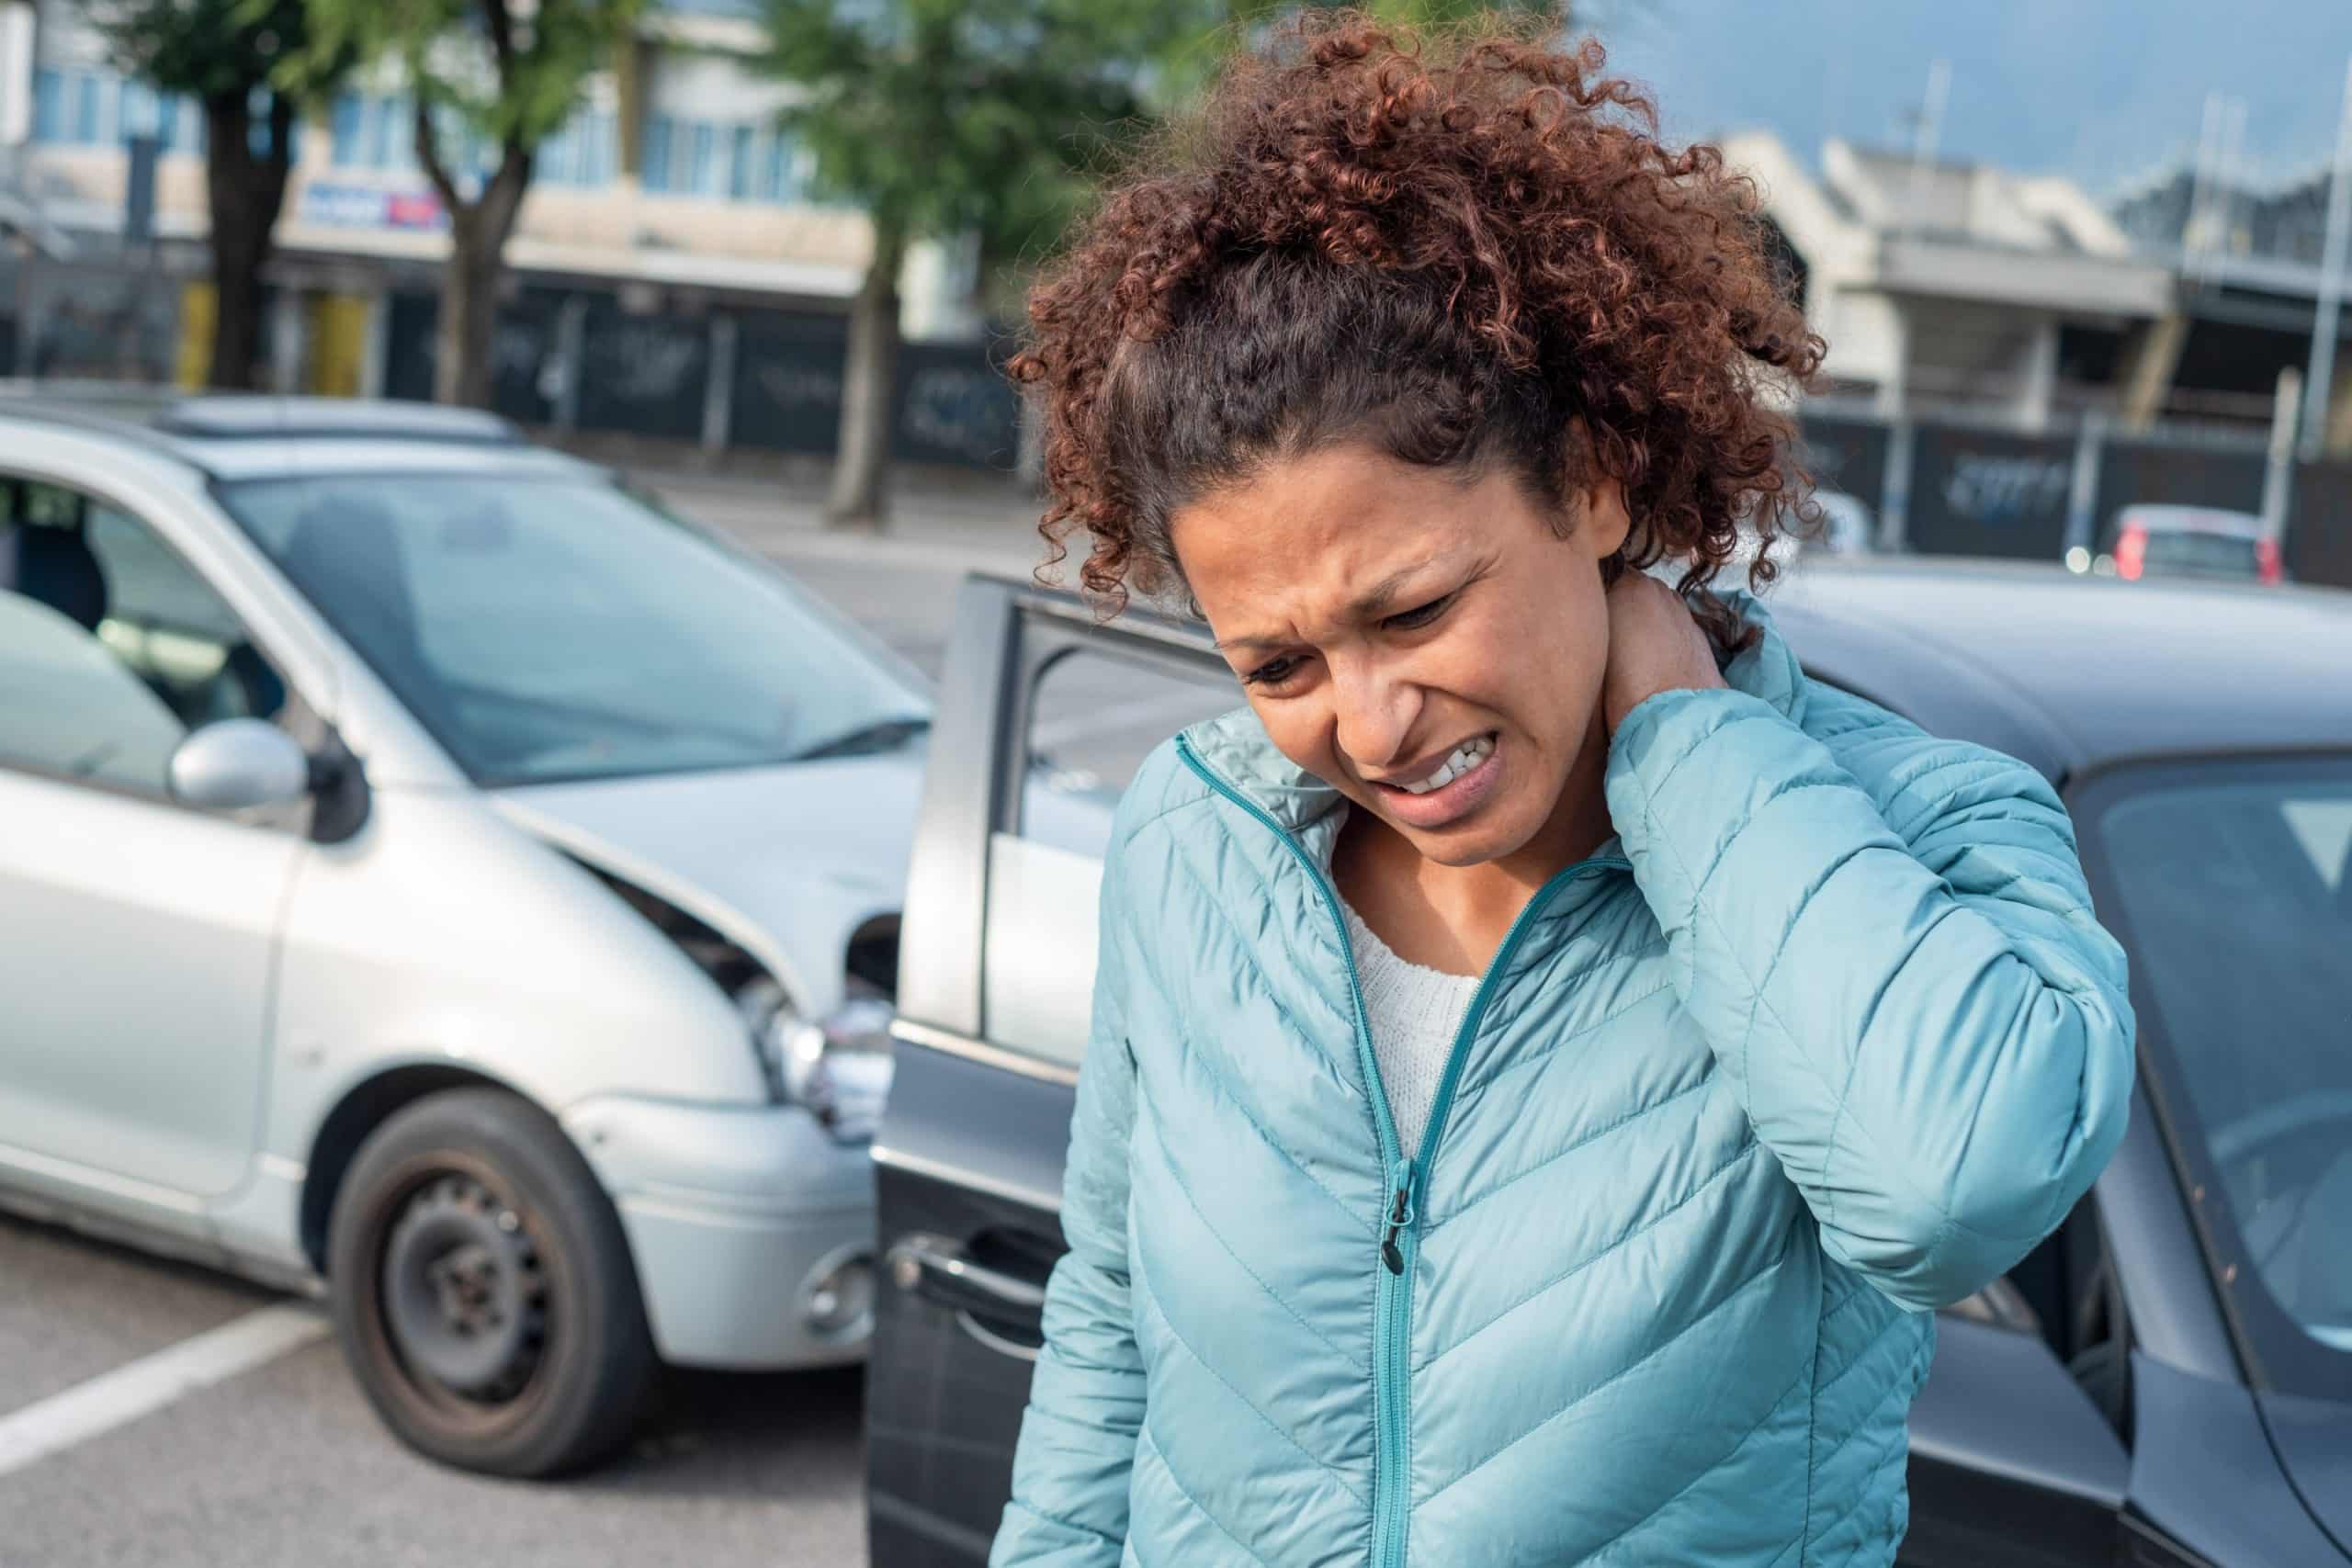 woman experiences whiplash - Whiplash Injury After Car Accident. These are just some Soft Tissue Injuries in Auto Accidents